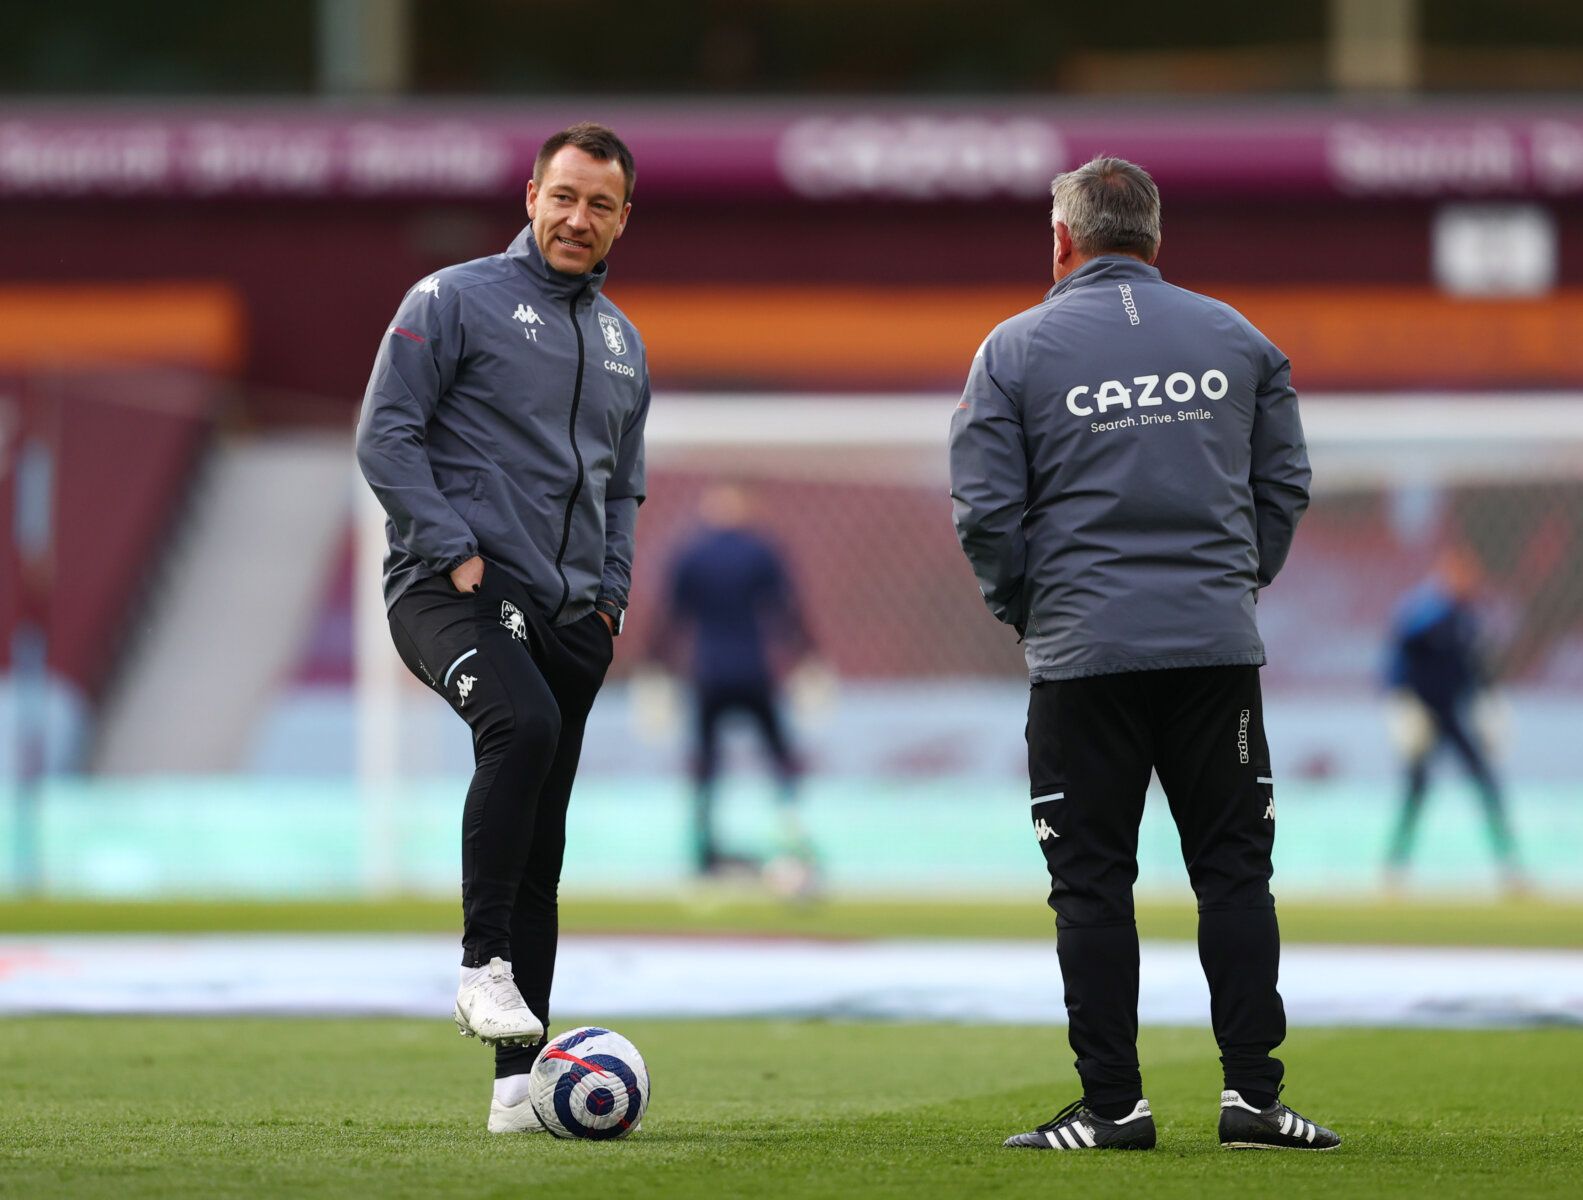 Soccer Football - Premier League - Aston Villa v West Bromwich Albion  - Villa Park, Birmingham, Britain - April 25, 2021 Aston Villa assistant manager John Terry before the match Pool via REUTERS/Michael Steele EDITORIAL USE ONLY. No use with unauthorized audio, video, data, fixture lists, club/league logos or 'live' services. Online in-match use limited to 75 images, no video emulation. No use in betting, games or single club /league/player publications.  Please contact your account representa